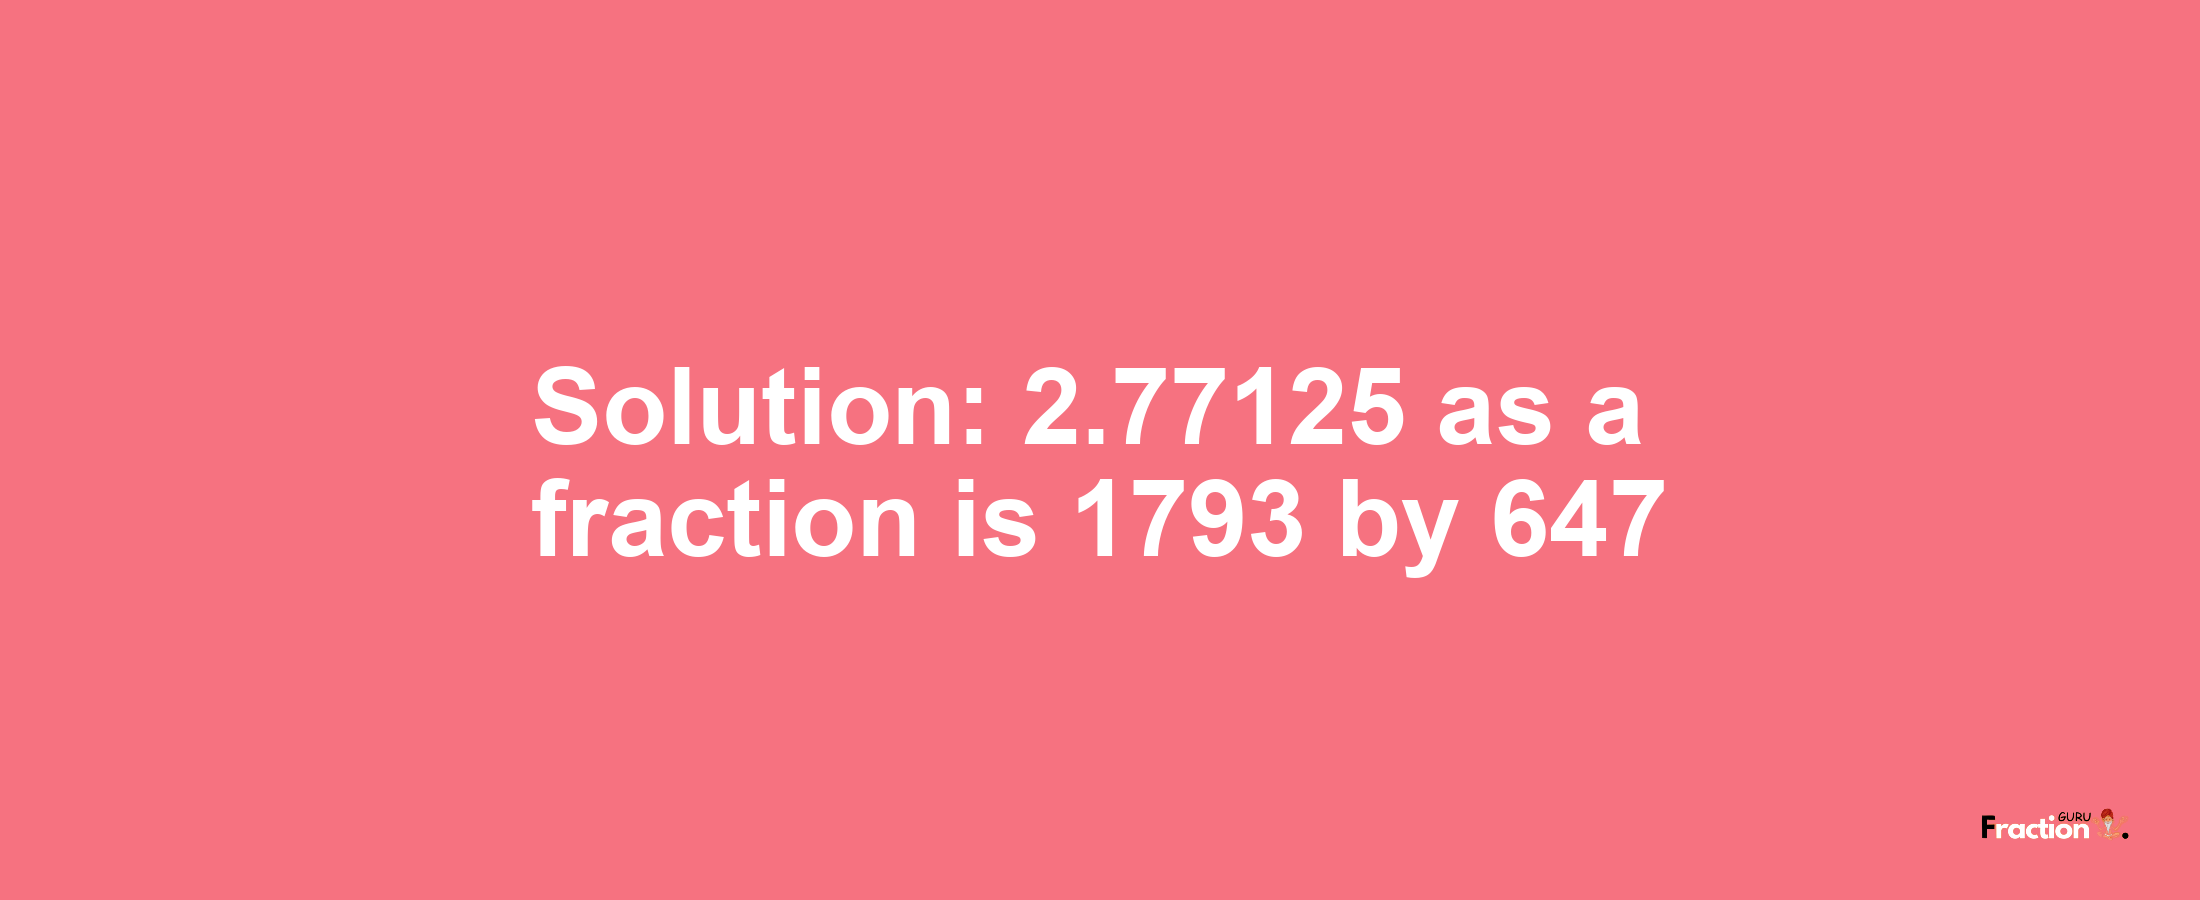 Solution:2.77125 as a fraction is 1793/647